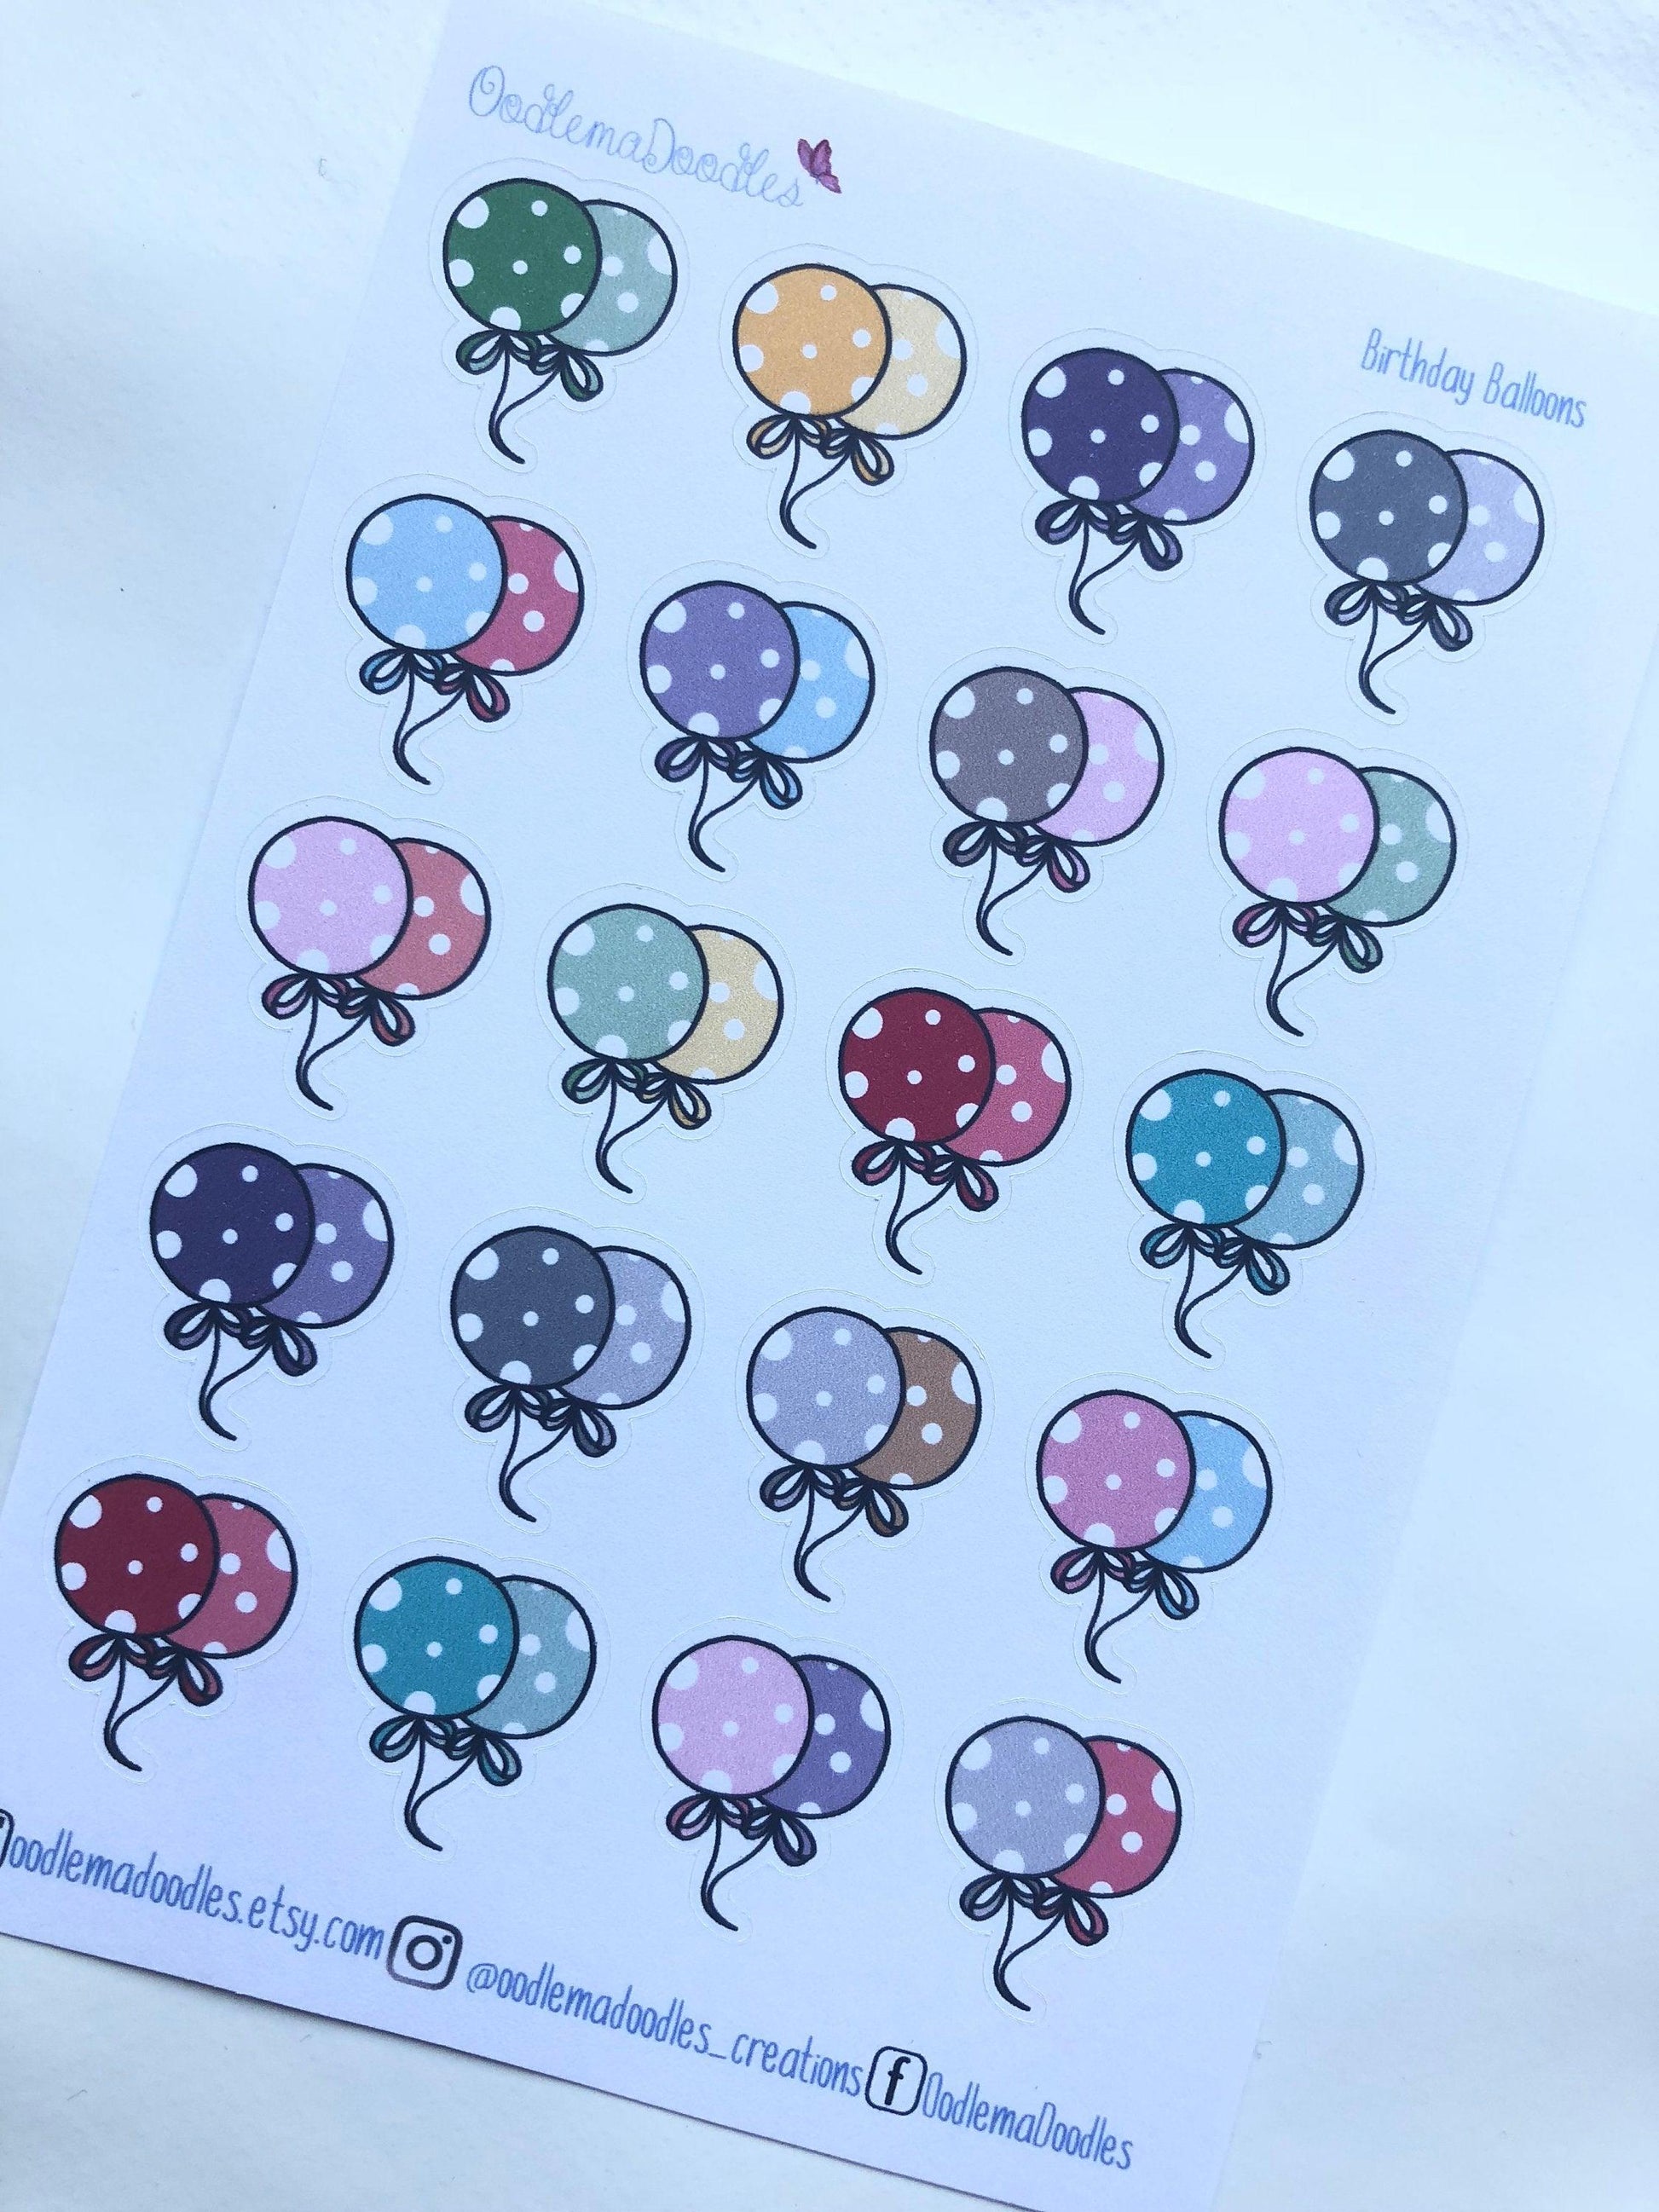 Balloon Stickers - oodlemadoodles